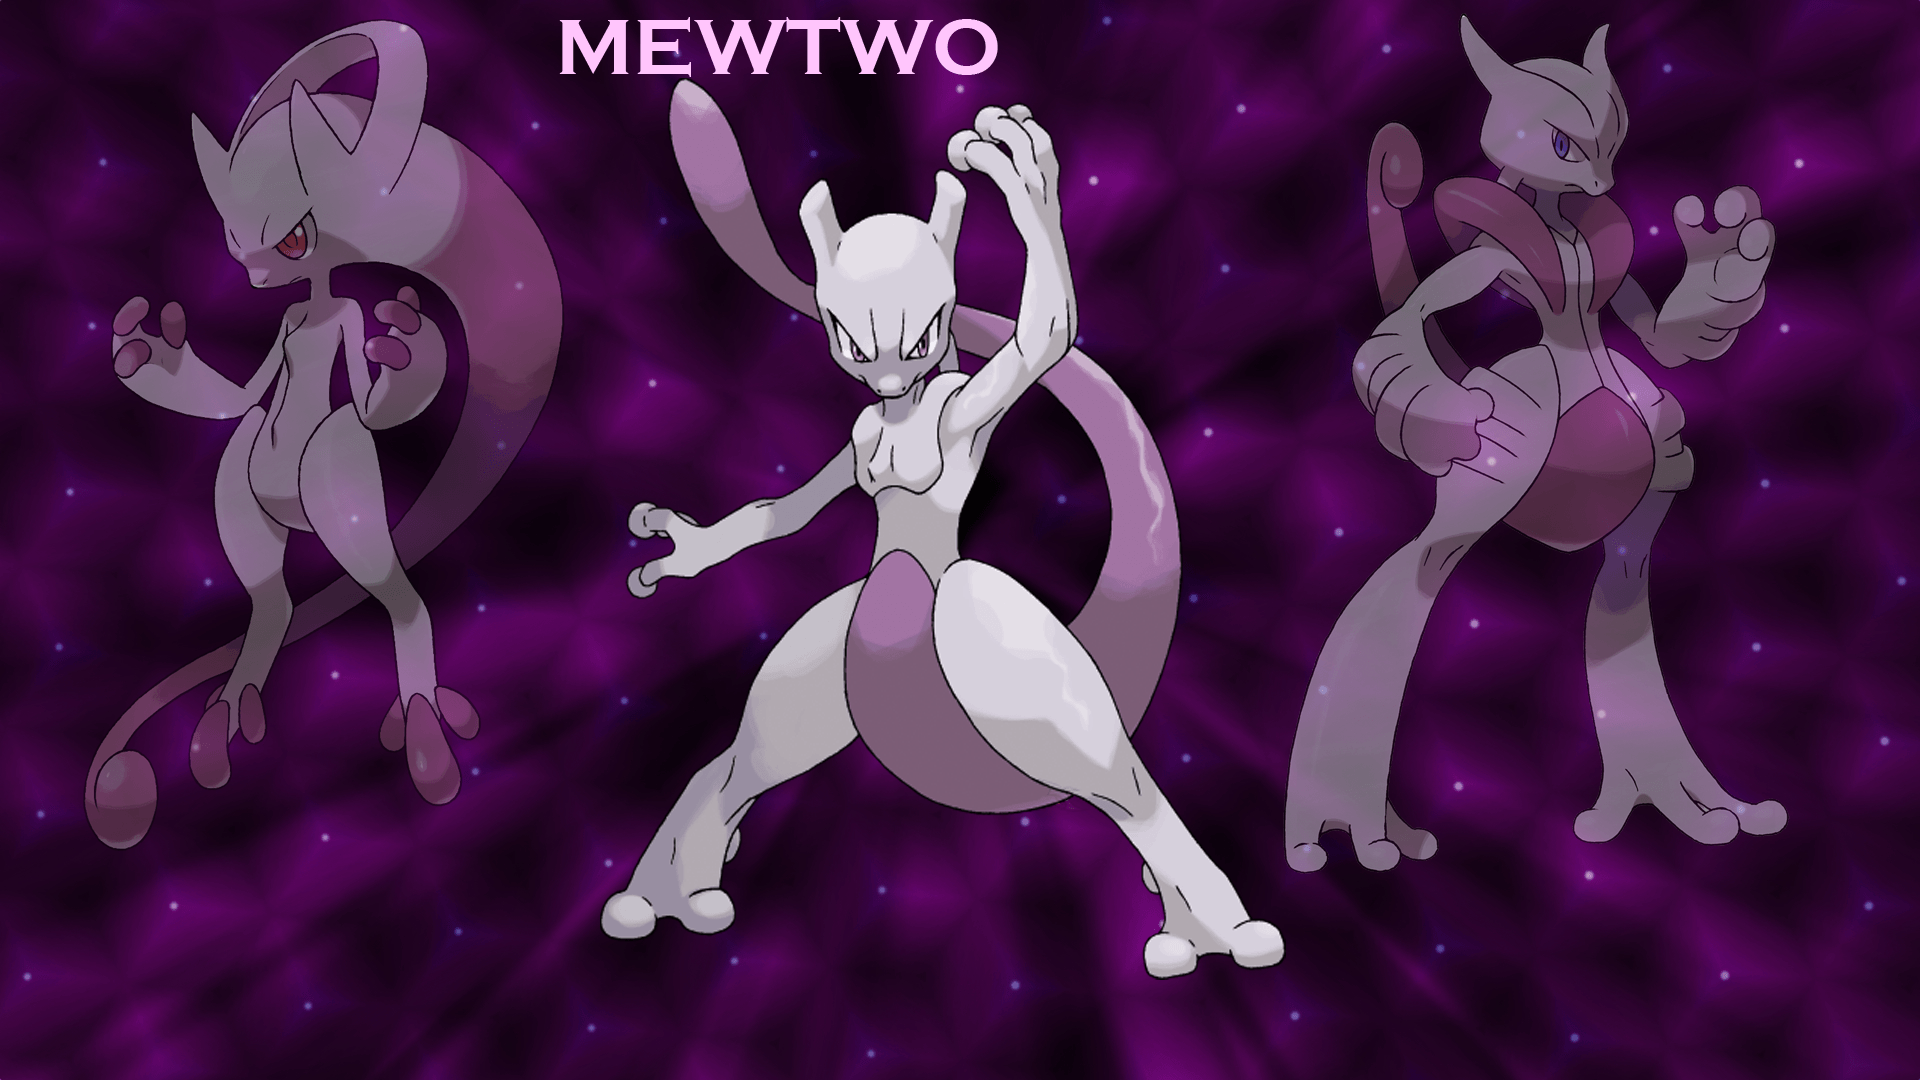 Download mewtwo and mew wallpaper mewtwo armor wallpaper mewtwo